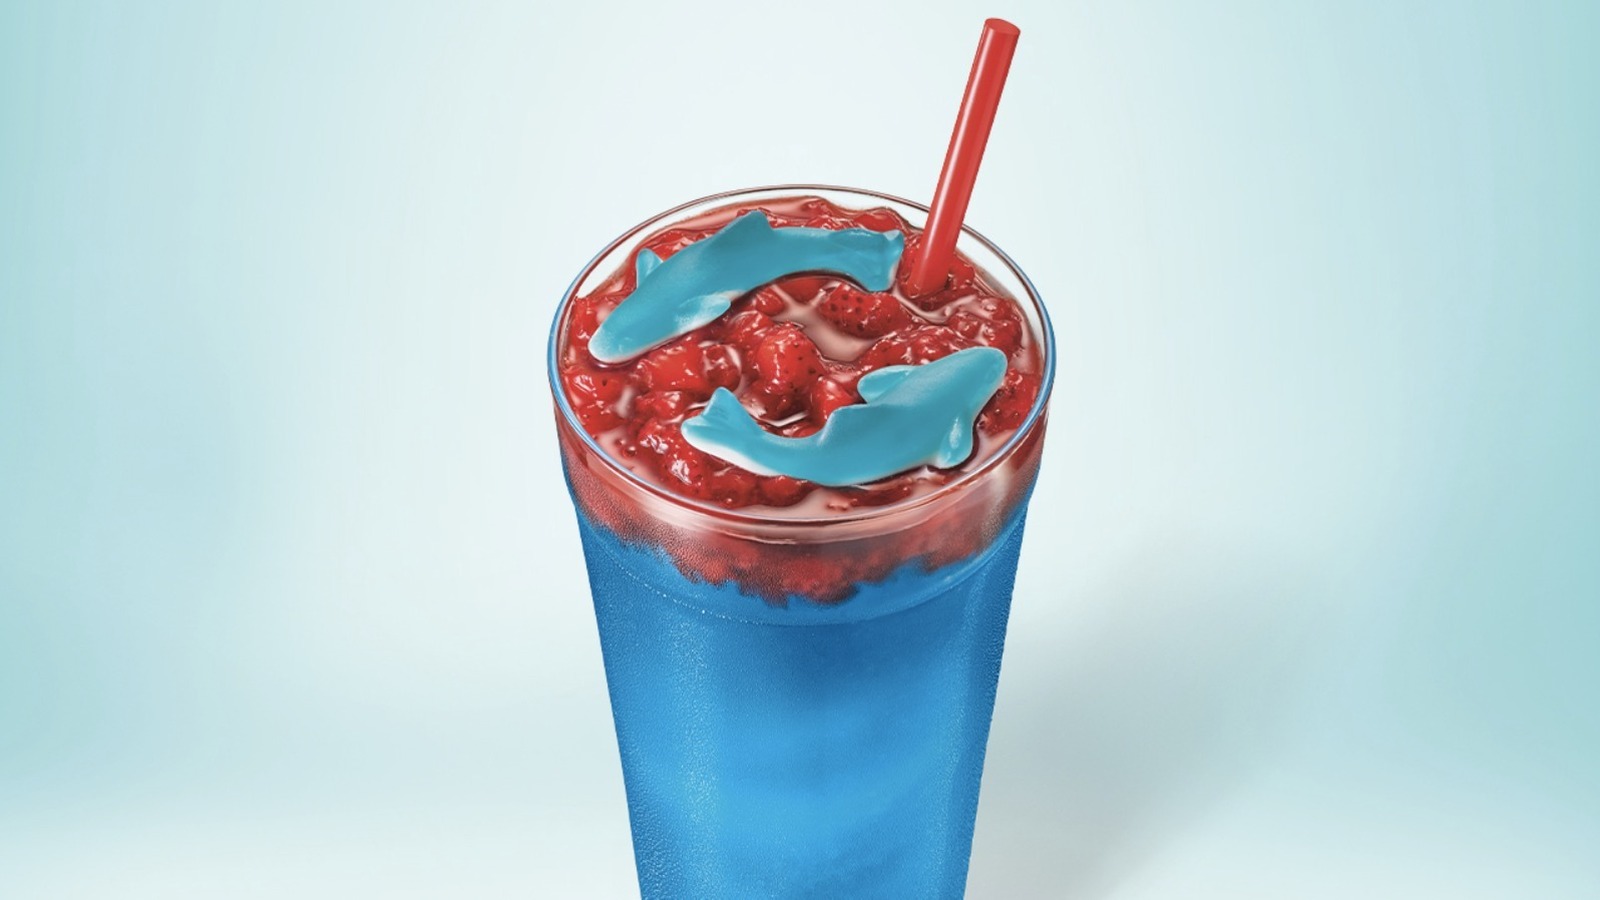 Sonic Just Brought Back Its Popular Shark Week Drink